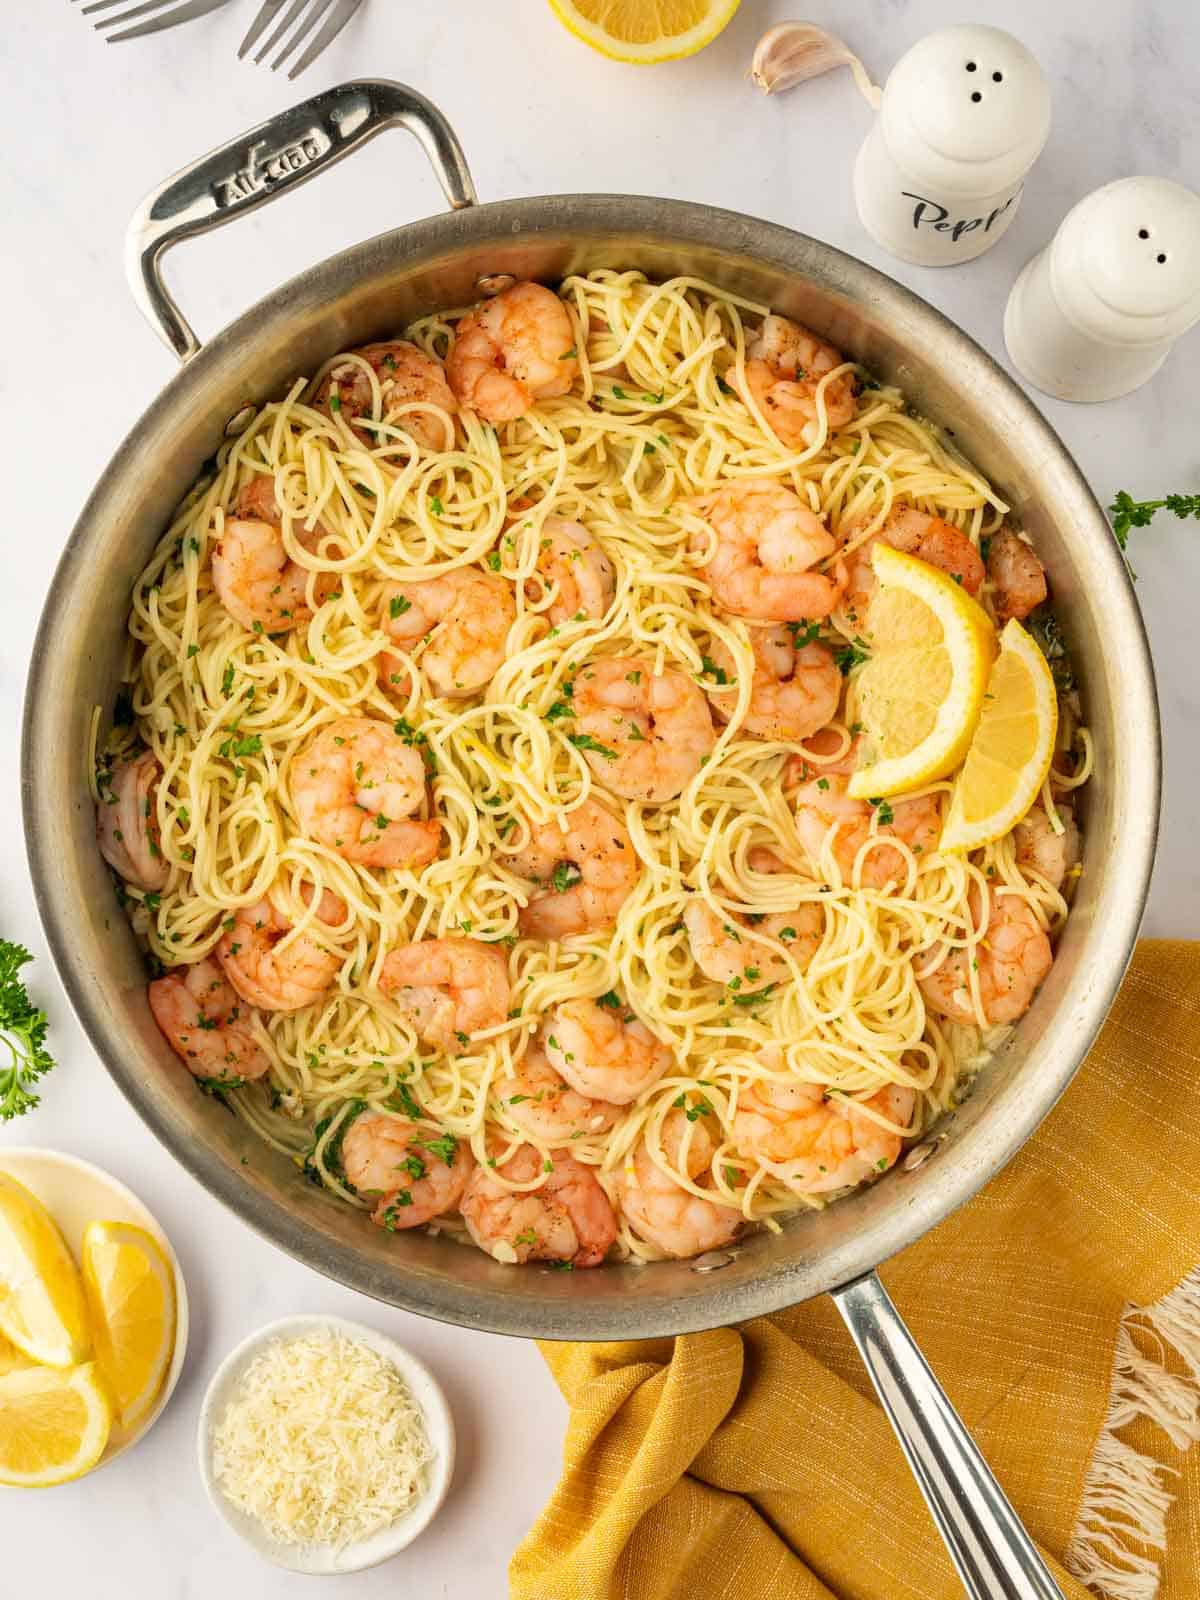 Pasta with shrimp and lemon wedges in a skillet.